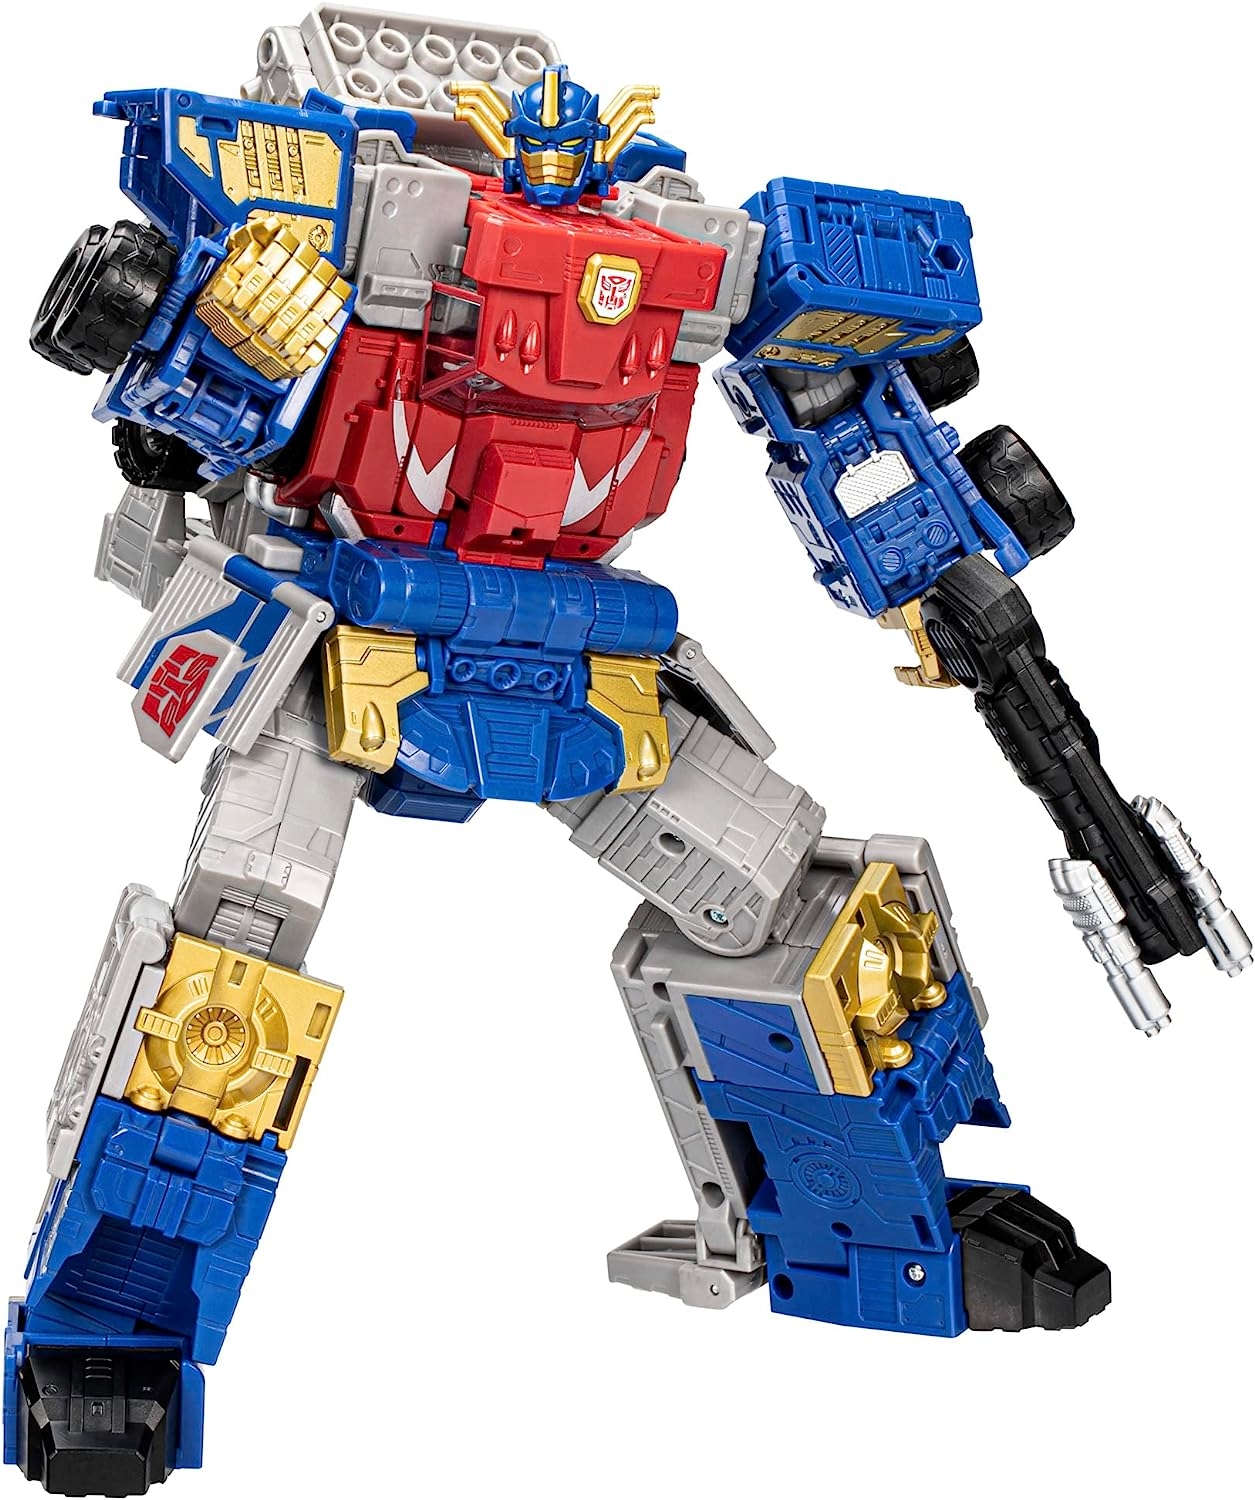 Transformers Toys Legacy Evolution Commander Armada Universe Optimus Prime Toy, 7.5-inch, Action Figure for Boys and Girls Ages